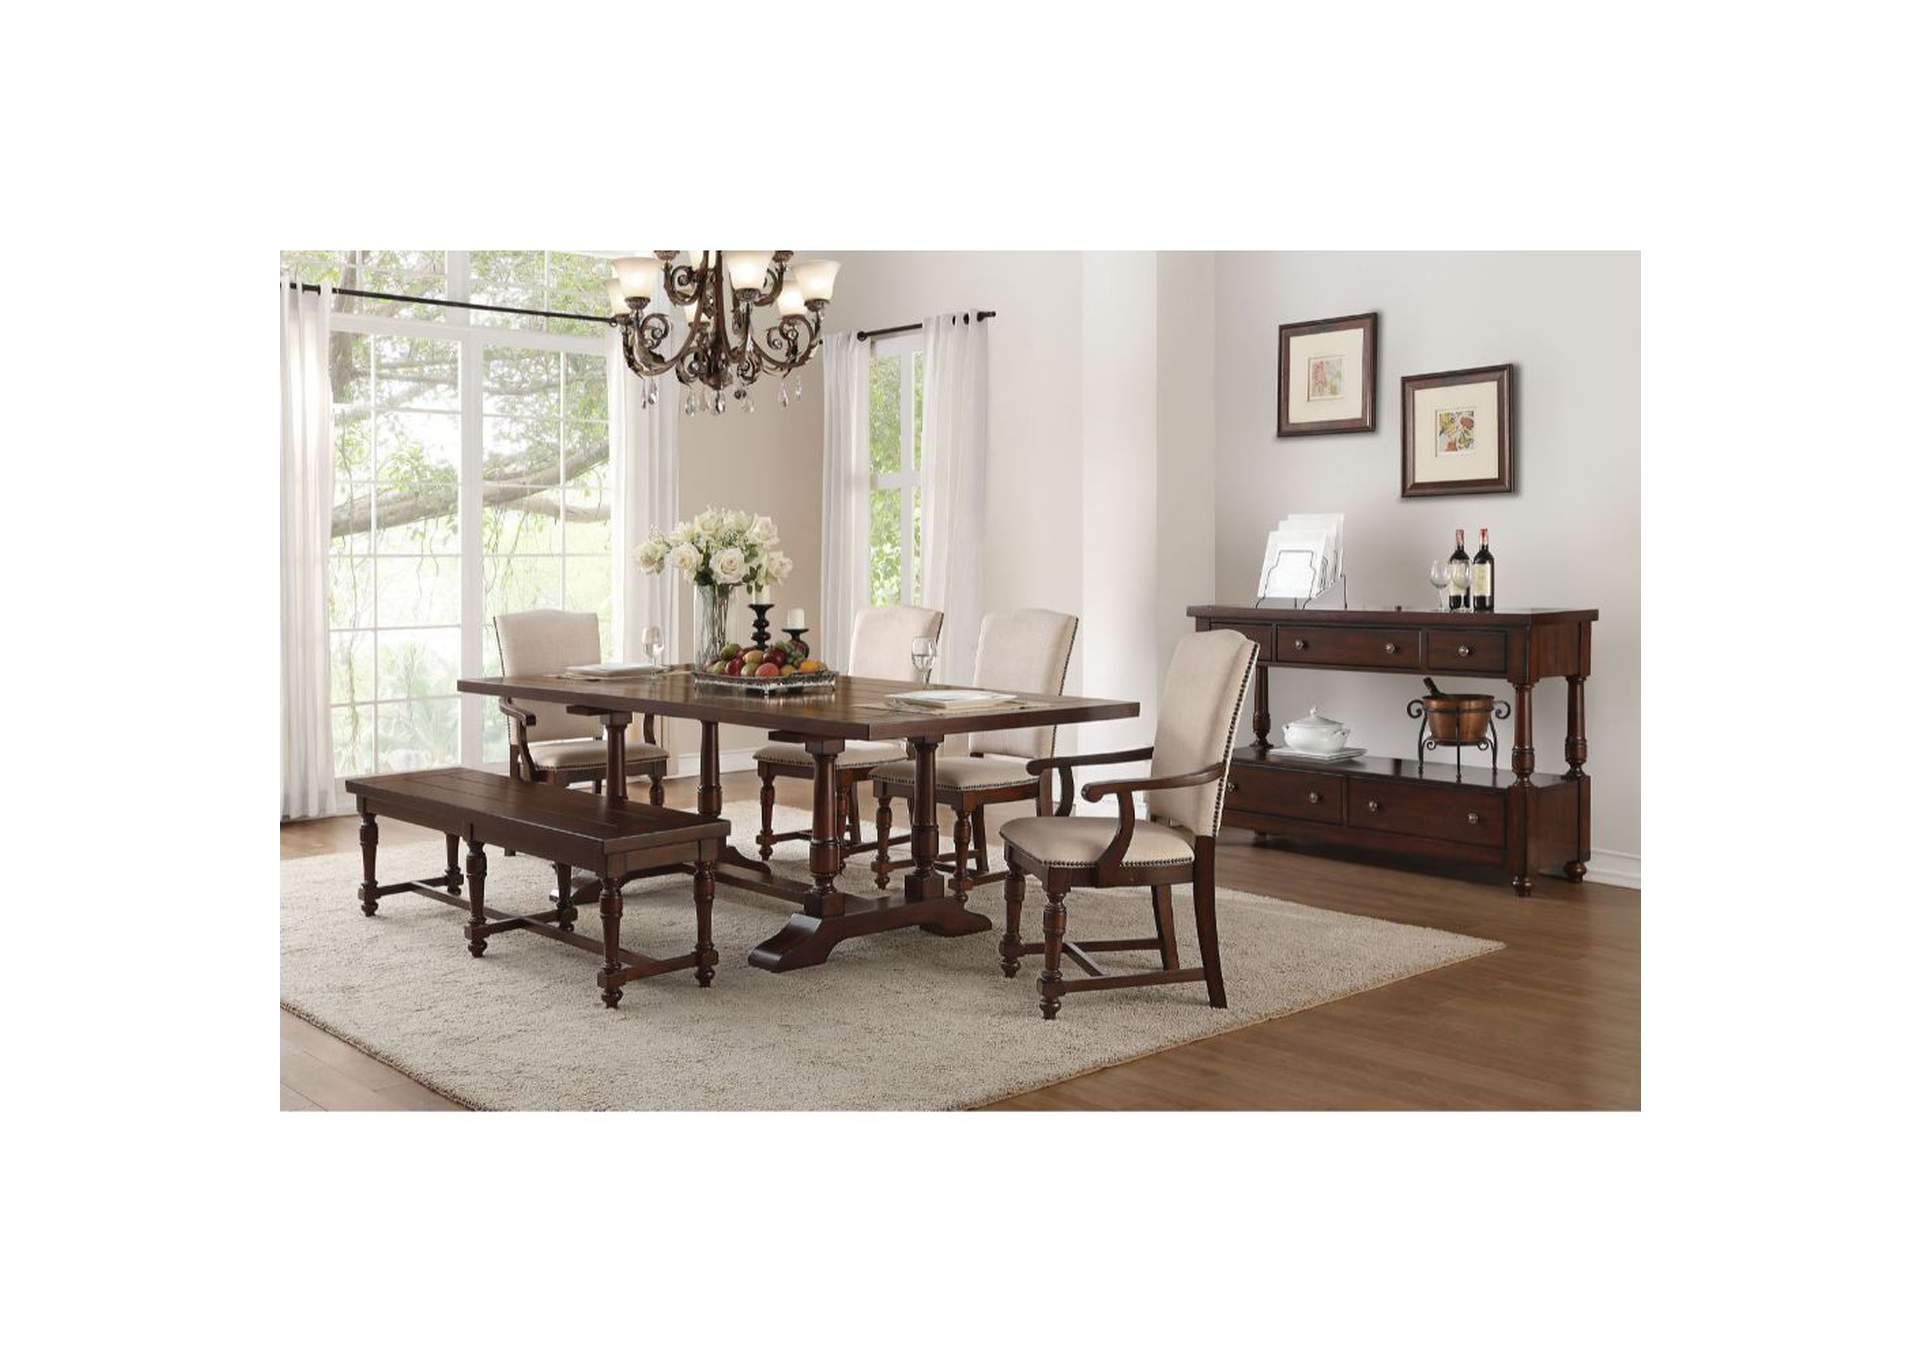 Tanner Dining Table,Acme